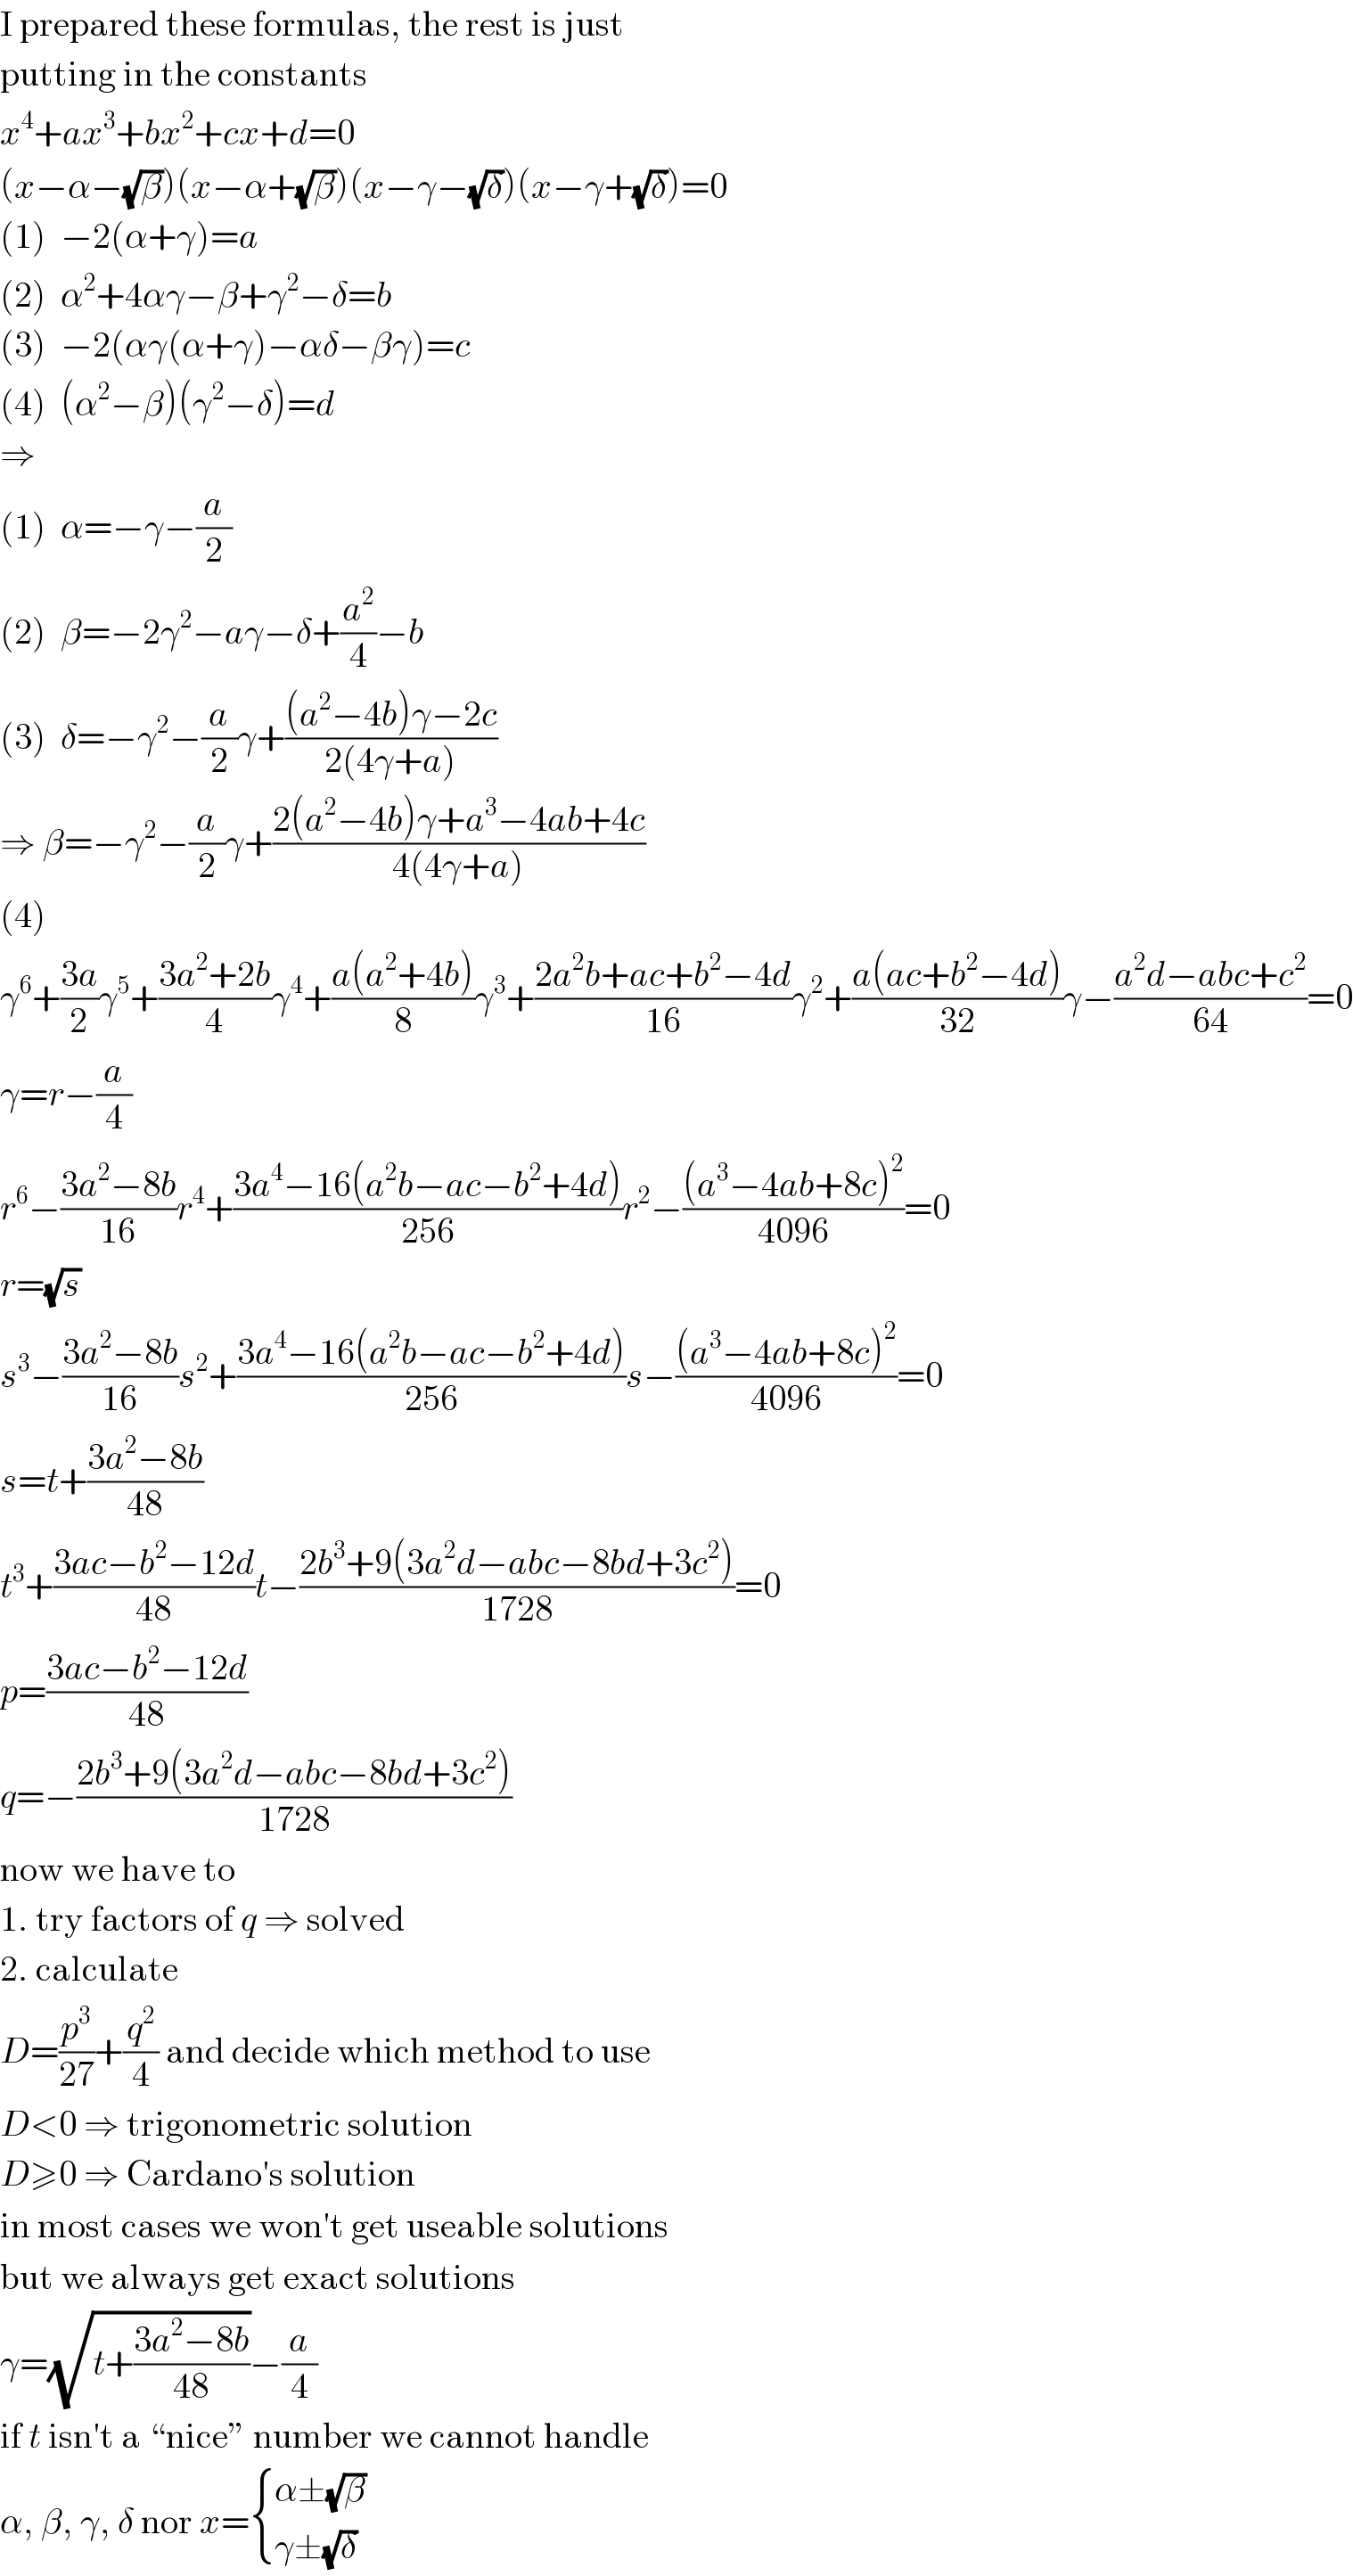 I prepared these formulas, the rest is just  putting in the constants  x^4 +ax^3 +bx^2 +cx+d=0  (x−α−(√β))(x−α+(√β))(x−γ−(√δ))(x−γ+(√δ))=0  (1)  −2(α+γ)=a  (2)  α^2 +4αγ−β+γ^2 −δ=b  (3)  −2(αγ(α+γ)−αδ−βγ)=c  (4)  (α^2 −β)(γ^2 −δ)=d  ⇒  (1)  α=−γ−(a/2)  (2)  β=−2γ^2 −aγ−δ+(a^2 /4)−b  (3)  δ=−γ^2 −(a/2)γ+(((a^2 −4b)γ−2c)/(2(4γ+a)))  ⇒ β=−γ^2 −(a/2)γ+((2(a^2 −4b)γ+a^3 −4ab+4c)/(4(4γ+a)))  (4)  γ^6 +((3a)/2)γ^5 +((3a^2 +2b)/4)γ^4 +((a(a^2 +4b))/8)γ^3 +((2a^2 b+ac+b^2 −4d)/(16))γ^2 +((a(ac+b^2 −4d))/(32))γ−((a^2 d−abc+c^2 )/(64))=0  γ=r−(a/4)  r^6 −((3a^2 −8b)/(16))r^4 +((3a^4 −16(a^2 b−ac−b^2 +4d))/(256))r^2 −(((a^3 −4ab+8c)^2 )/(4096))=0  r=(√s)  s^3 −((3a^2 −8b)/(16))s^2 +((3a^4 −16(a^2 b−ac−b^2 +4d))/(256))s−(((a^3 −4ab+8c)^2 )/(4096))=0  s=t+((3a^2 −8b)/(48))  t^3 +((3ac−b^2 −12d)/(48))t−((2b^3 +9(3a^2 d−abc−8bd+3c^2 ))/(1728))=0  p=((3ac−b^2 −12d)/(48))  q=−((2b^3 +9(3a^2 d−abc−8bd+3c^2 ))/(1728))  now we have to  1. try factors of q ⇒ solved  2. calculate  D=(p^3 /(27))+(q^2 /4) and decide which method to use  D<0 ⇒ trigonometric solution  D≥0 ⇒ Cardano′s solution  in most cases we won′t get useable solutions  but we always get exact solutions  γ=(√(t+((3a^2 −8b)/(48))))−(a/4)  if t isn′t a “nice” number we cannot handle  α, β, γ, δ nor x= { ((α±(√β))),((γ±(√δ))) :}  